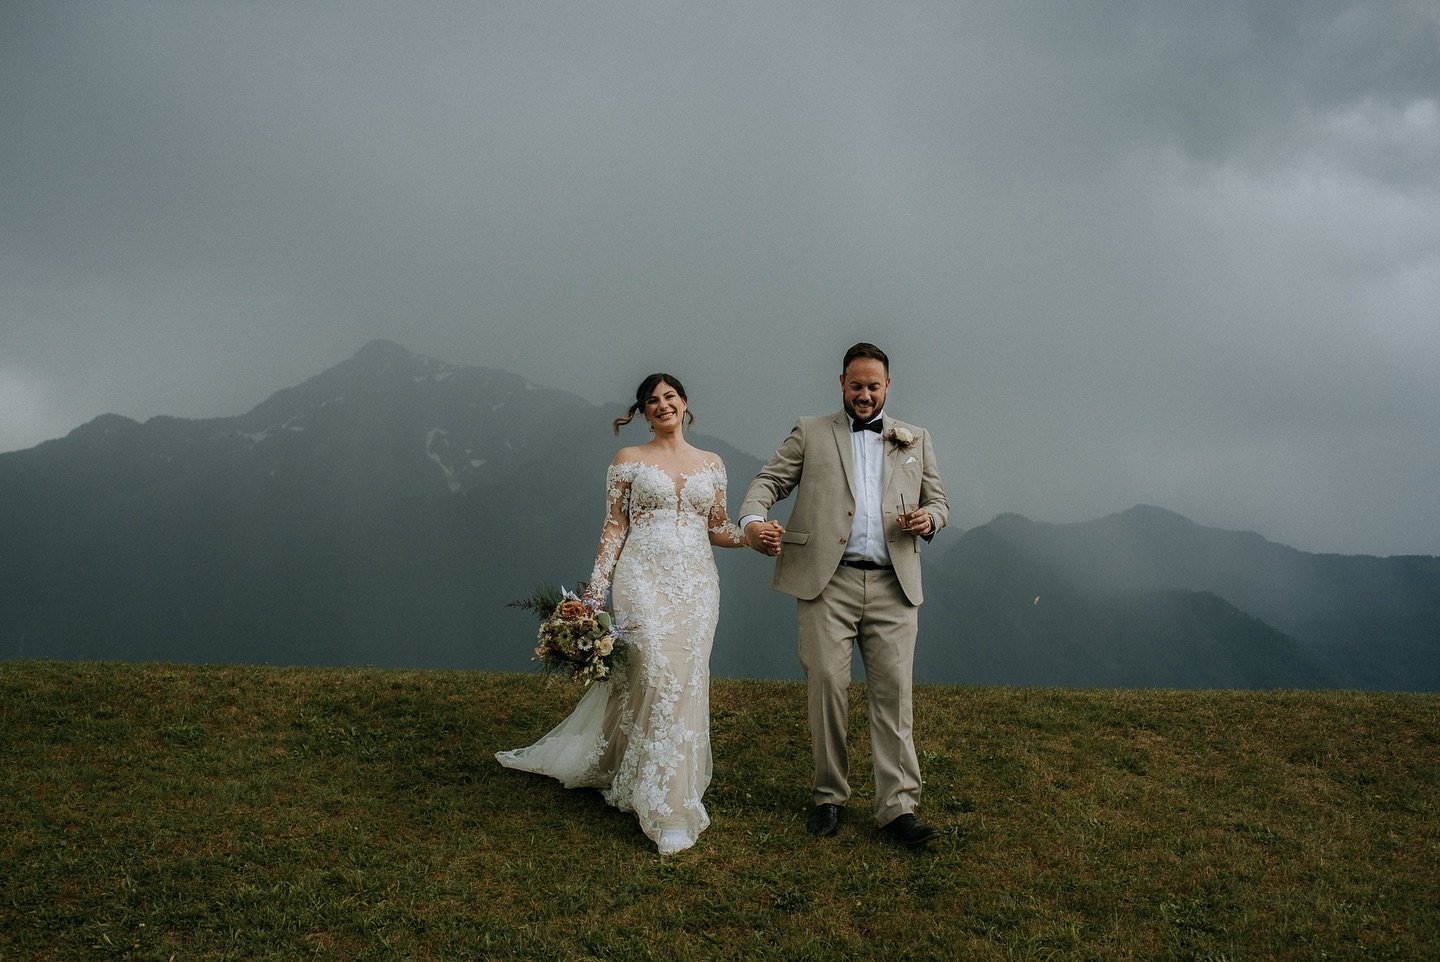 When you&rsquo;re just married and a little rain cloud doesn&rsquo;t dampen your mood (but might have made your catering team scramble to move everything back inside from the outdoor buffet!) 🌧️☂️

#wanderingweddings #junebugweddings #rfpotd  #frase